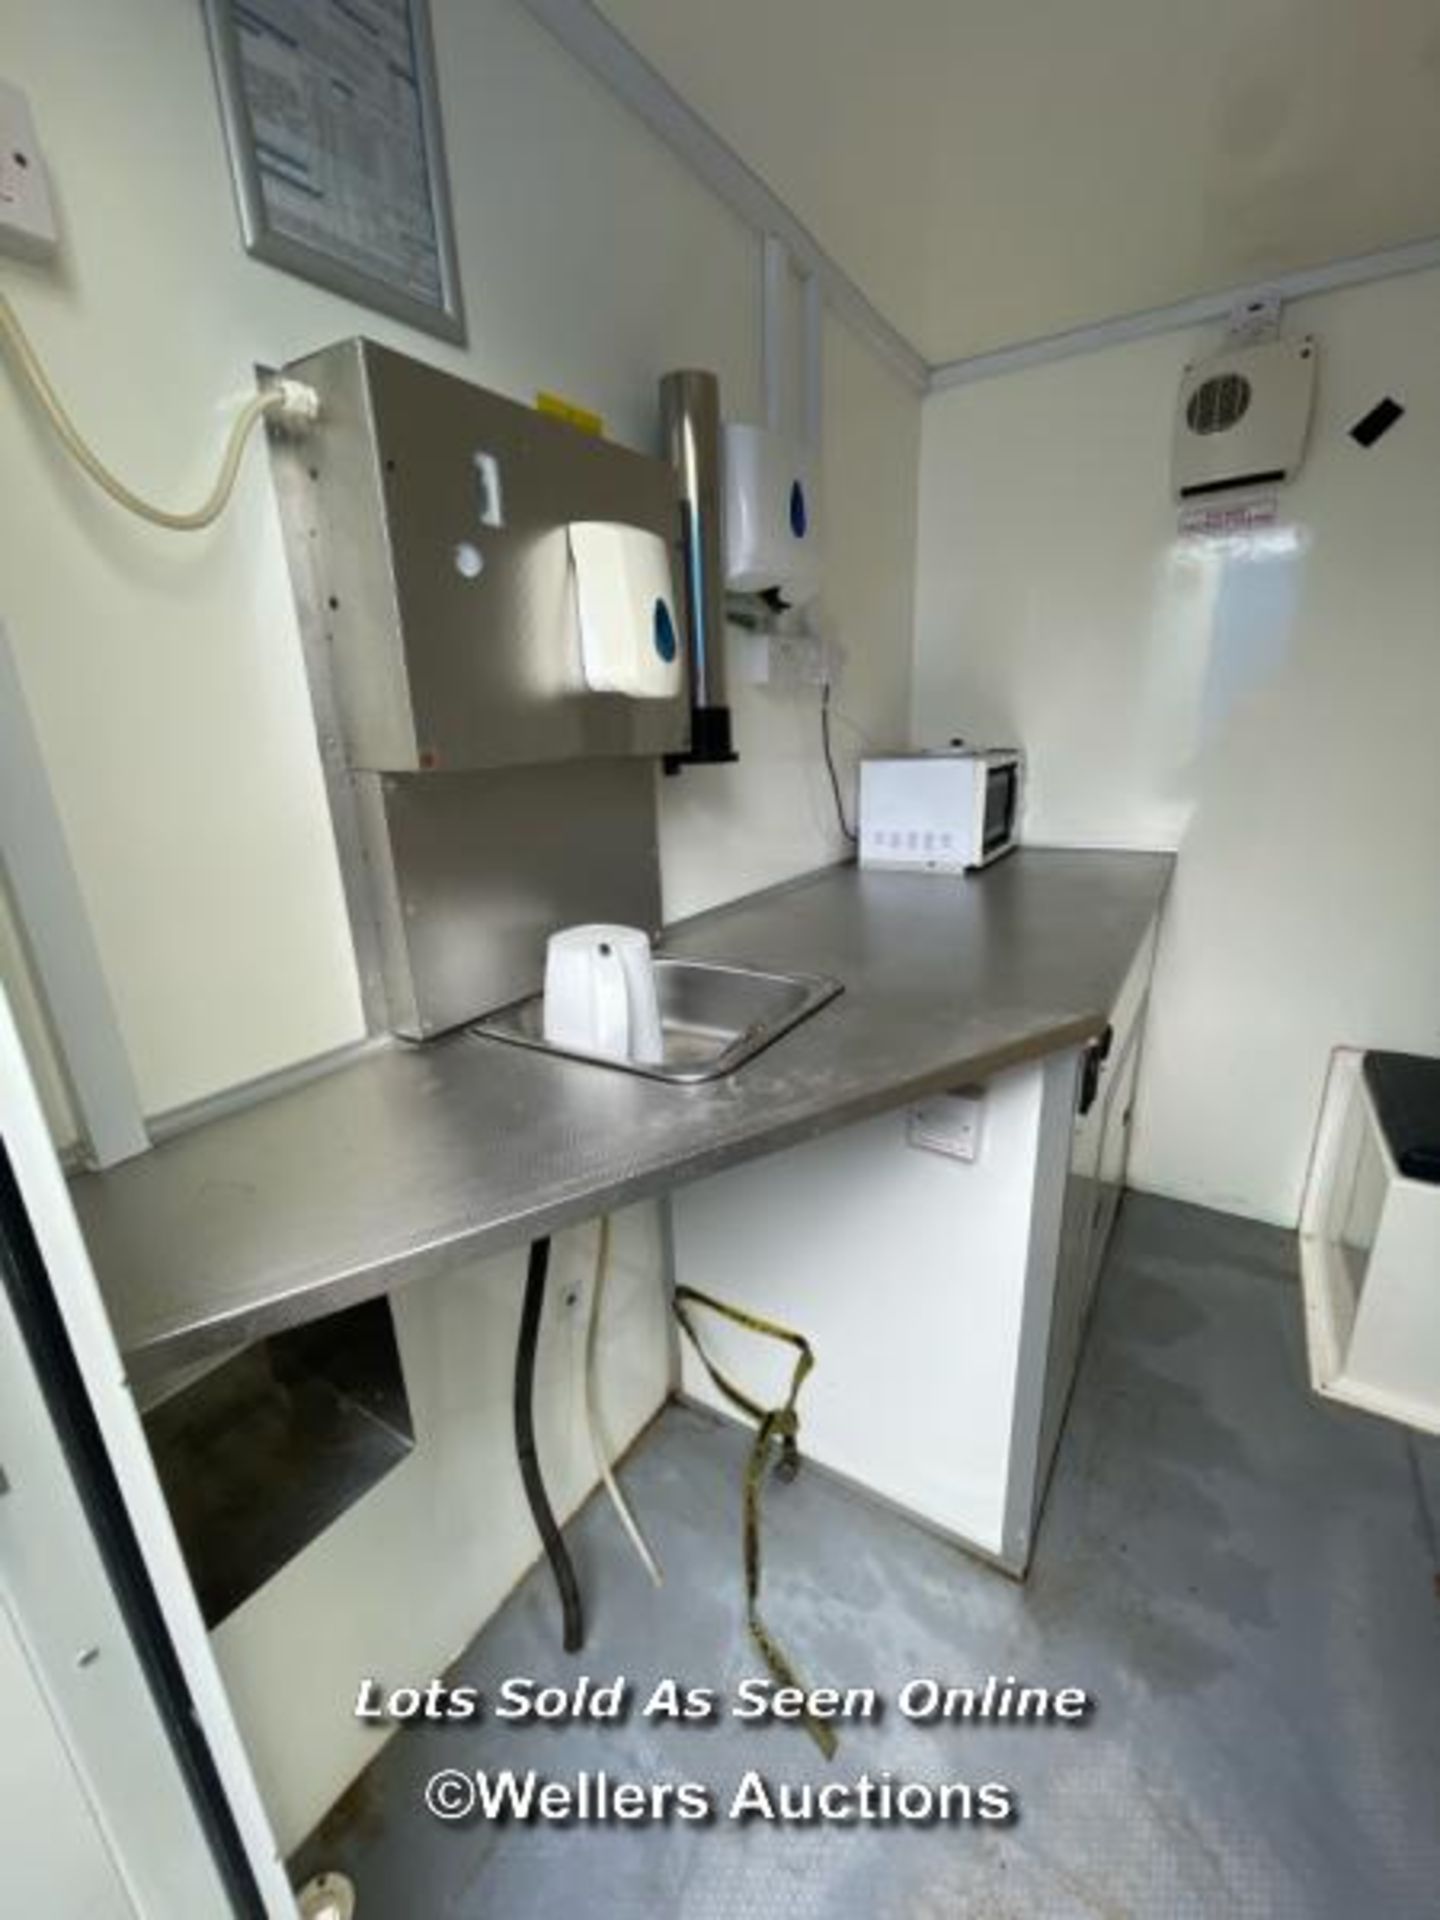 6 PERSON 12 X 7.5FT AJC EASY CABIN TOWABLE WELFARE UNIT, INCLUDES WASH BASIN, KETTLE, MICROWAVE, - Image 9 of 21